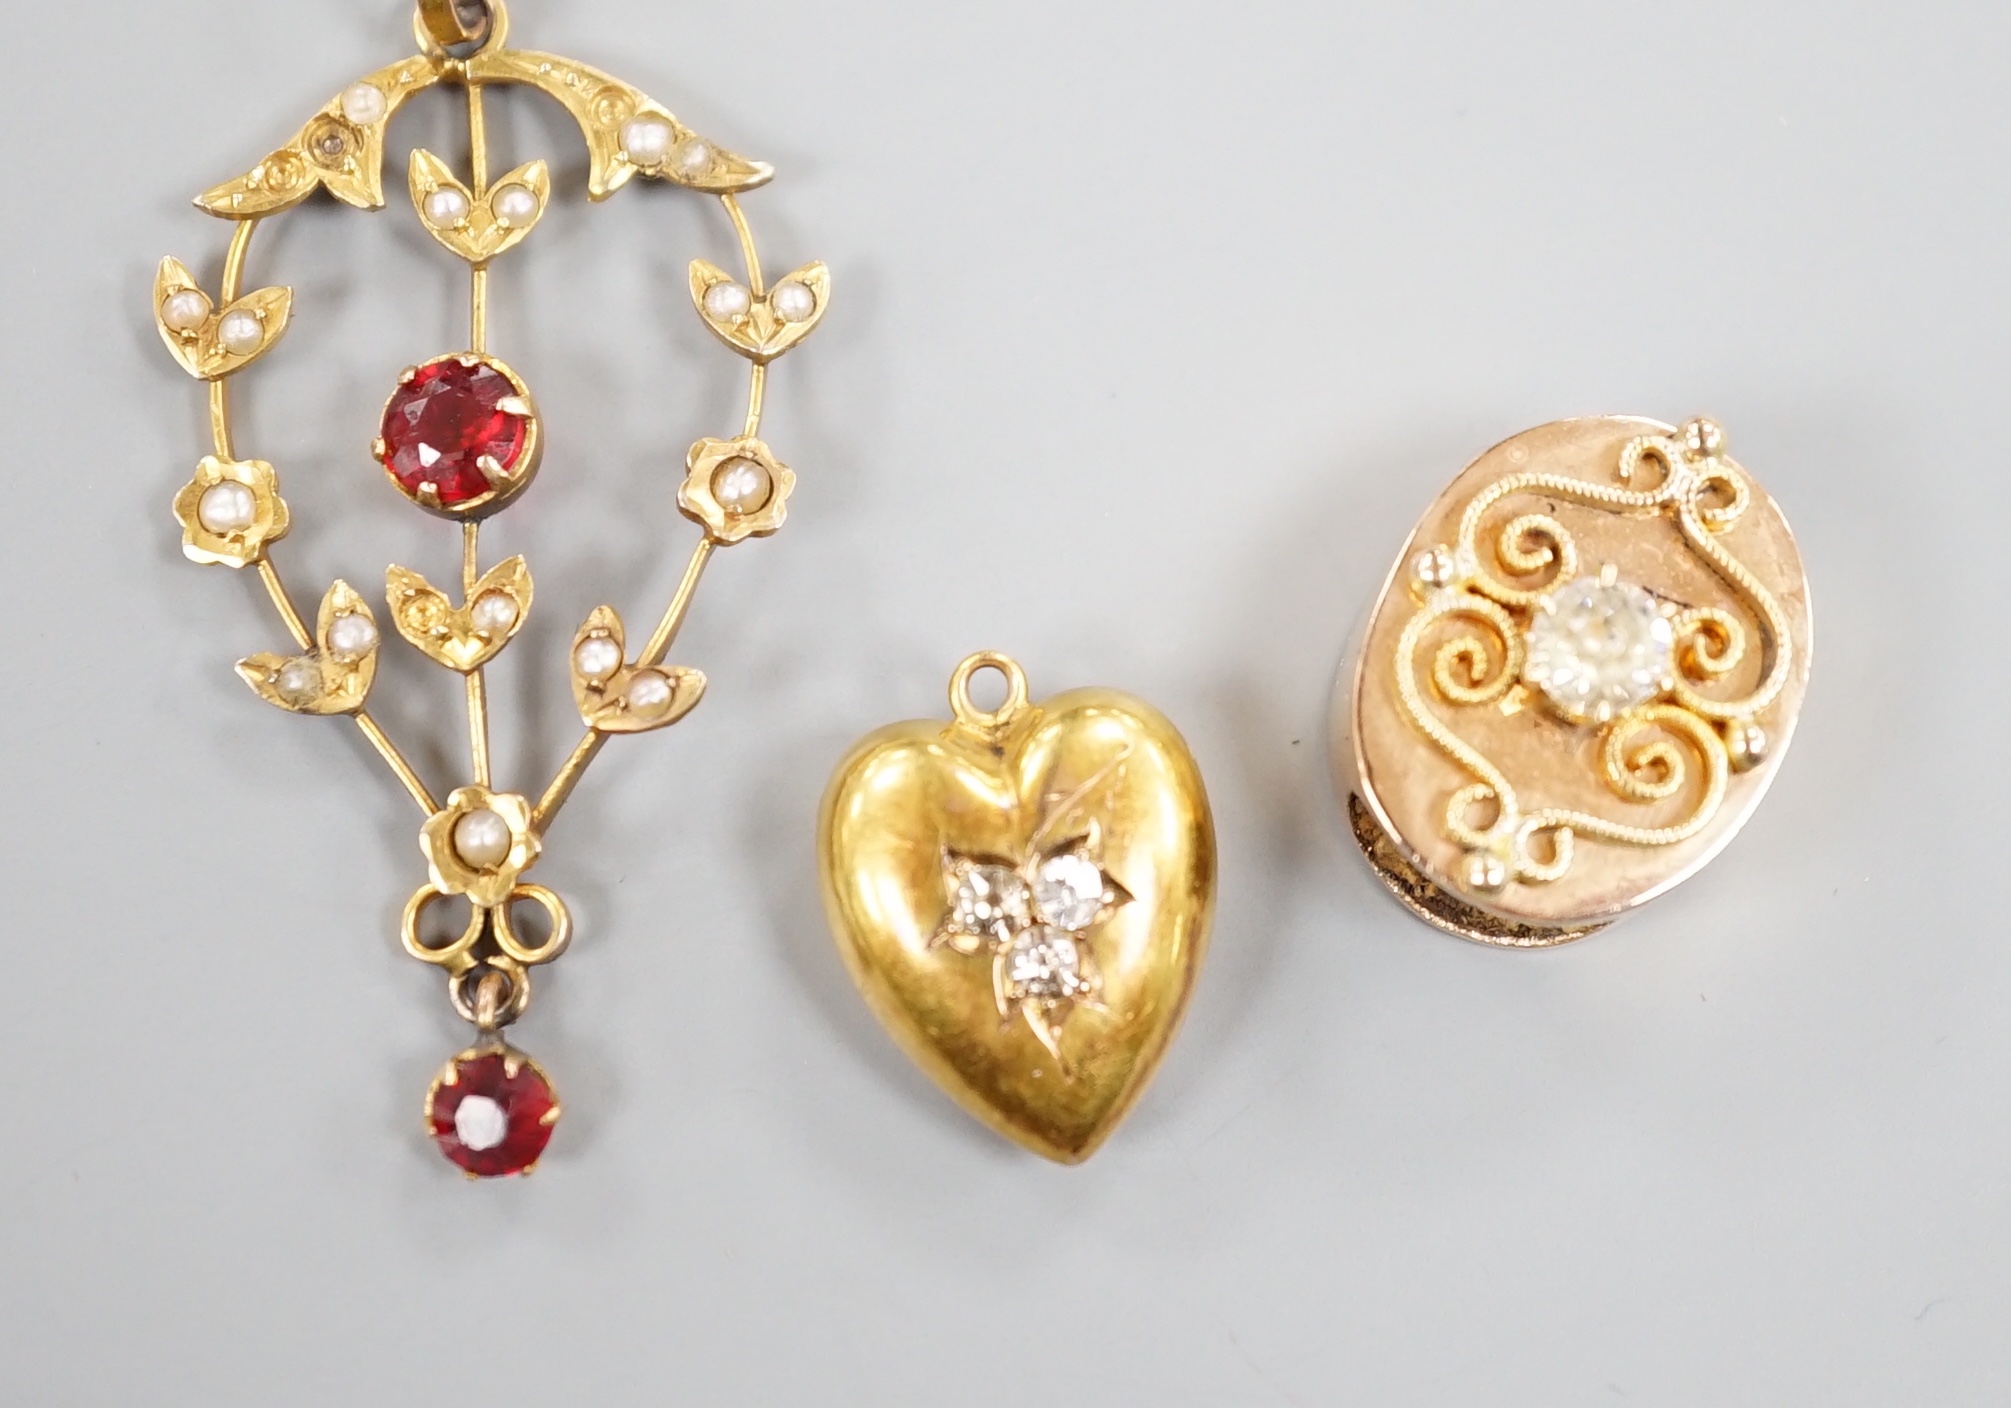 An early 20th century 15ct gold and three stone diamond set heart pendant, 16mm, gross 1.9 grams, an Austro-Hungarian yellow metal and paste set claps and a 9ct, gem and seed pearl set drop pendant, gross 2.6 grams.